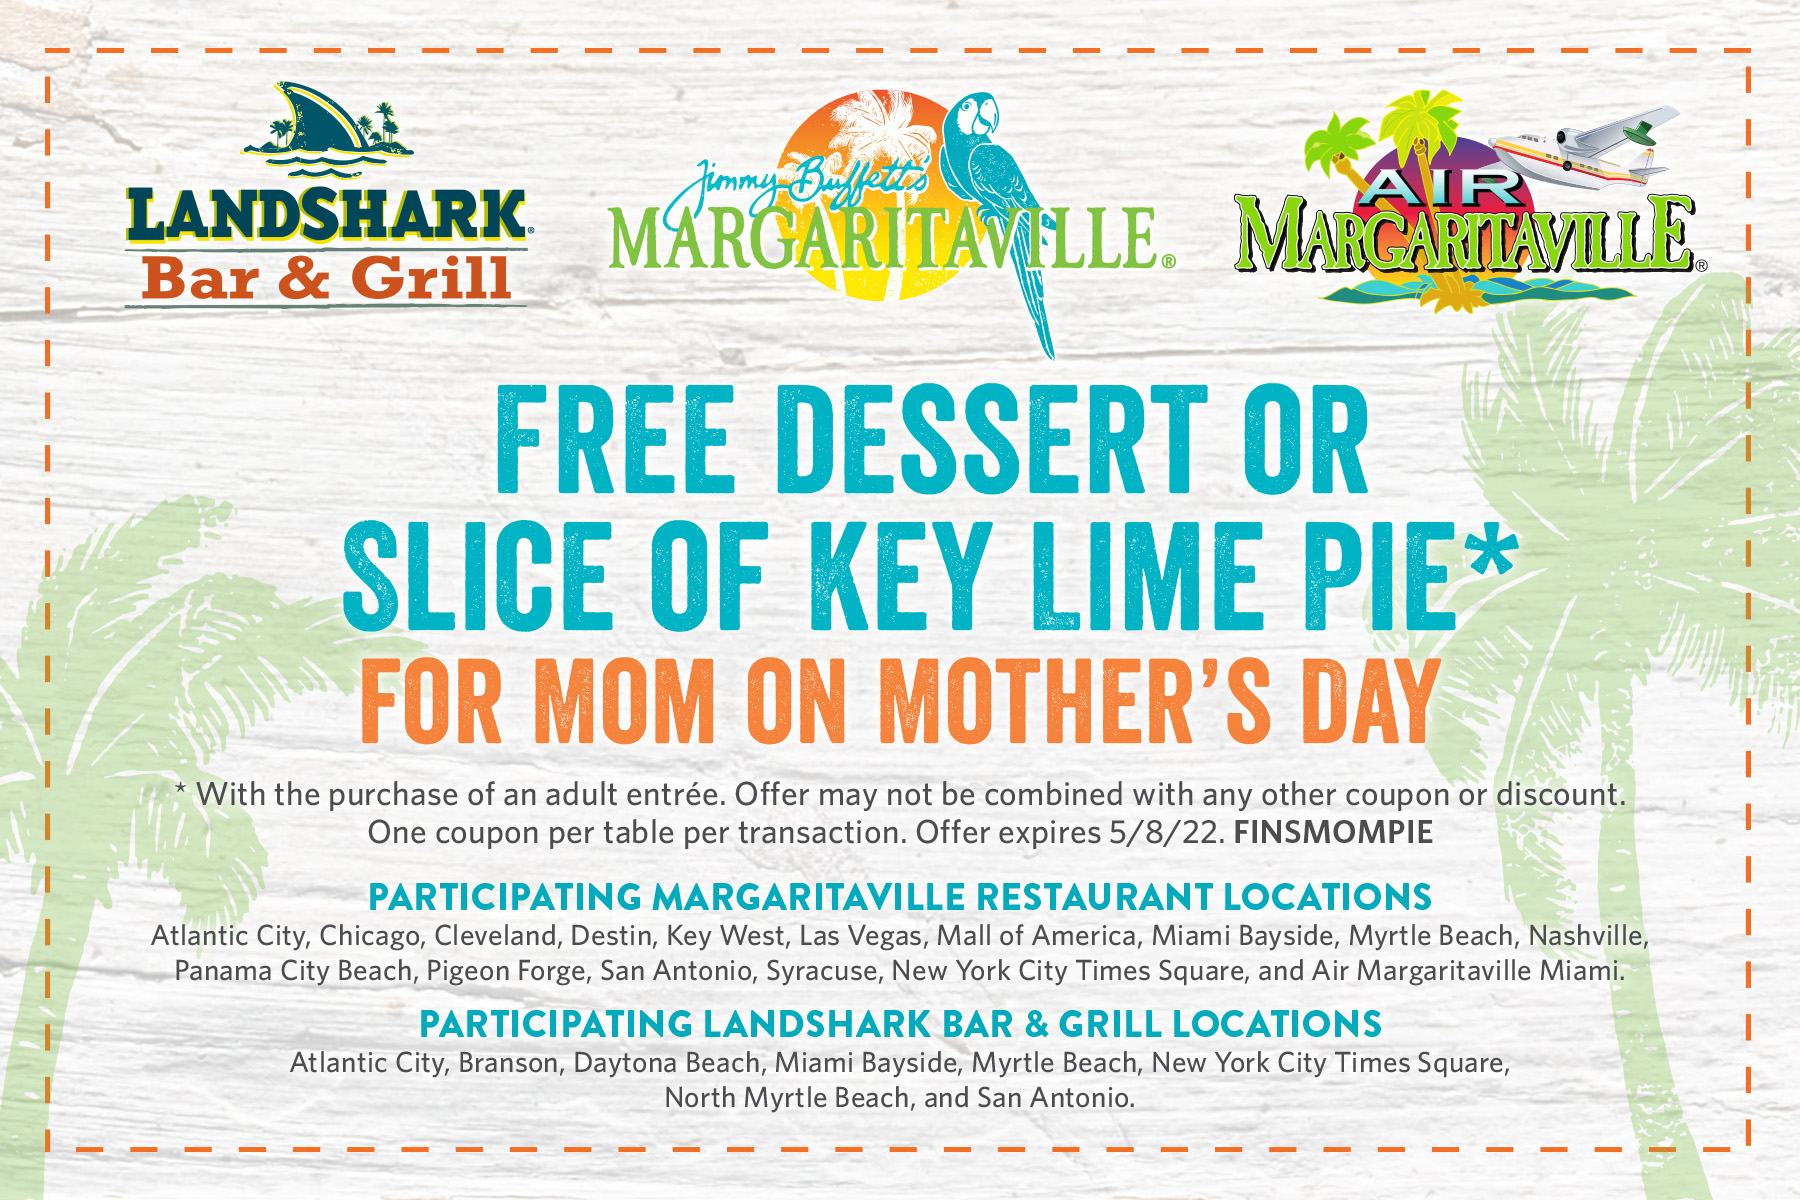 Free Dessert or Slice of Key Lime Pie for Mom on Mother's Day*